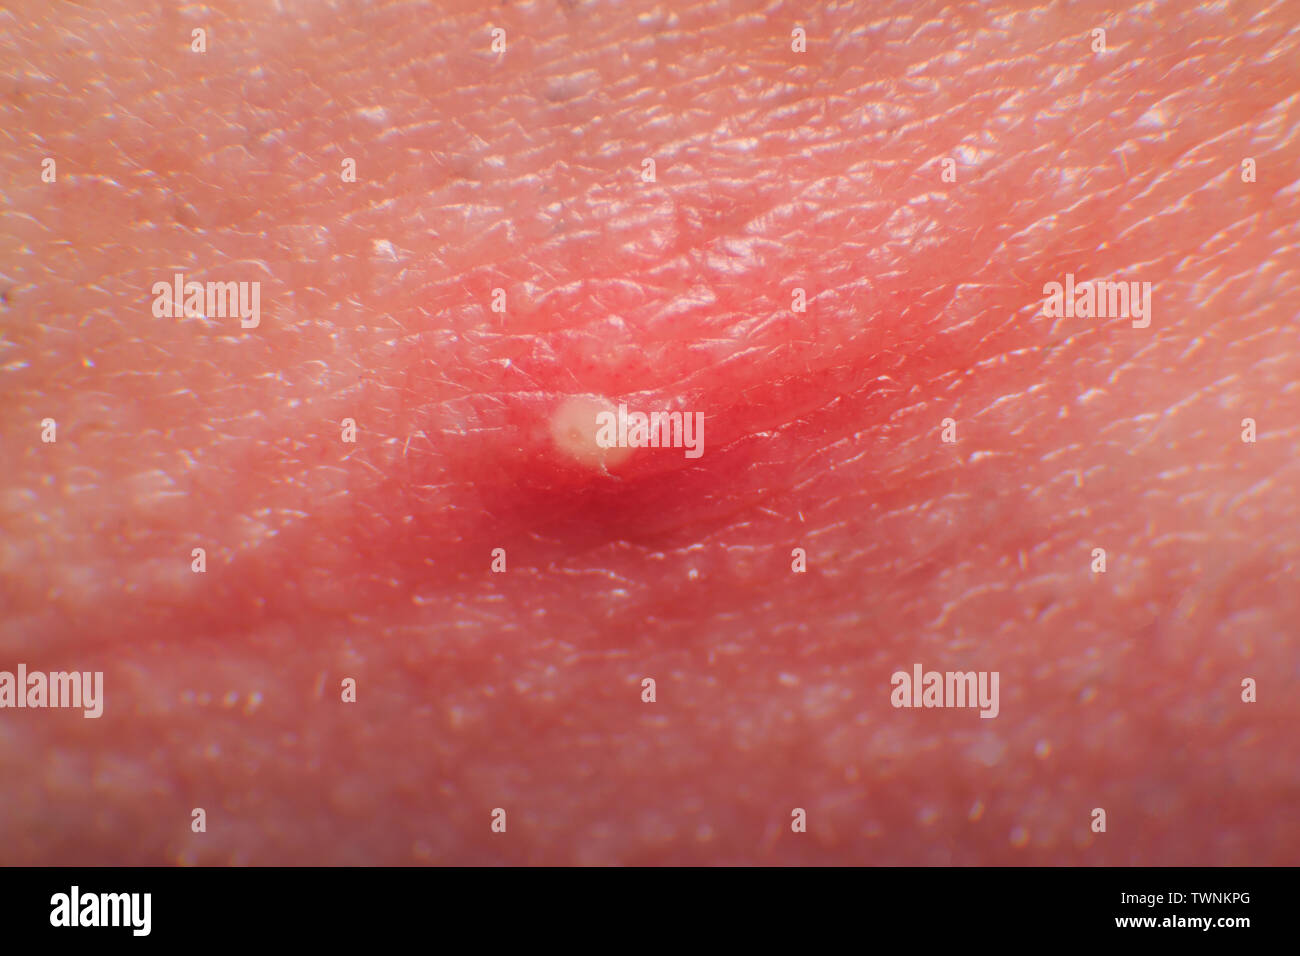 White pimple hair follicle inflammation on adult man skin Stock Photo